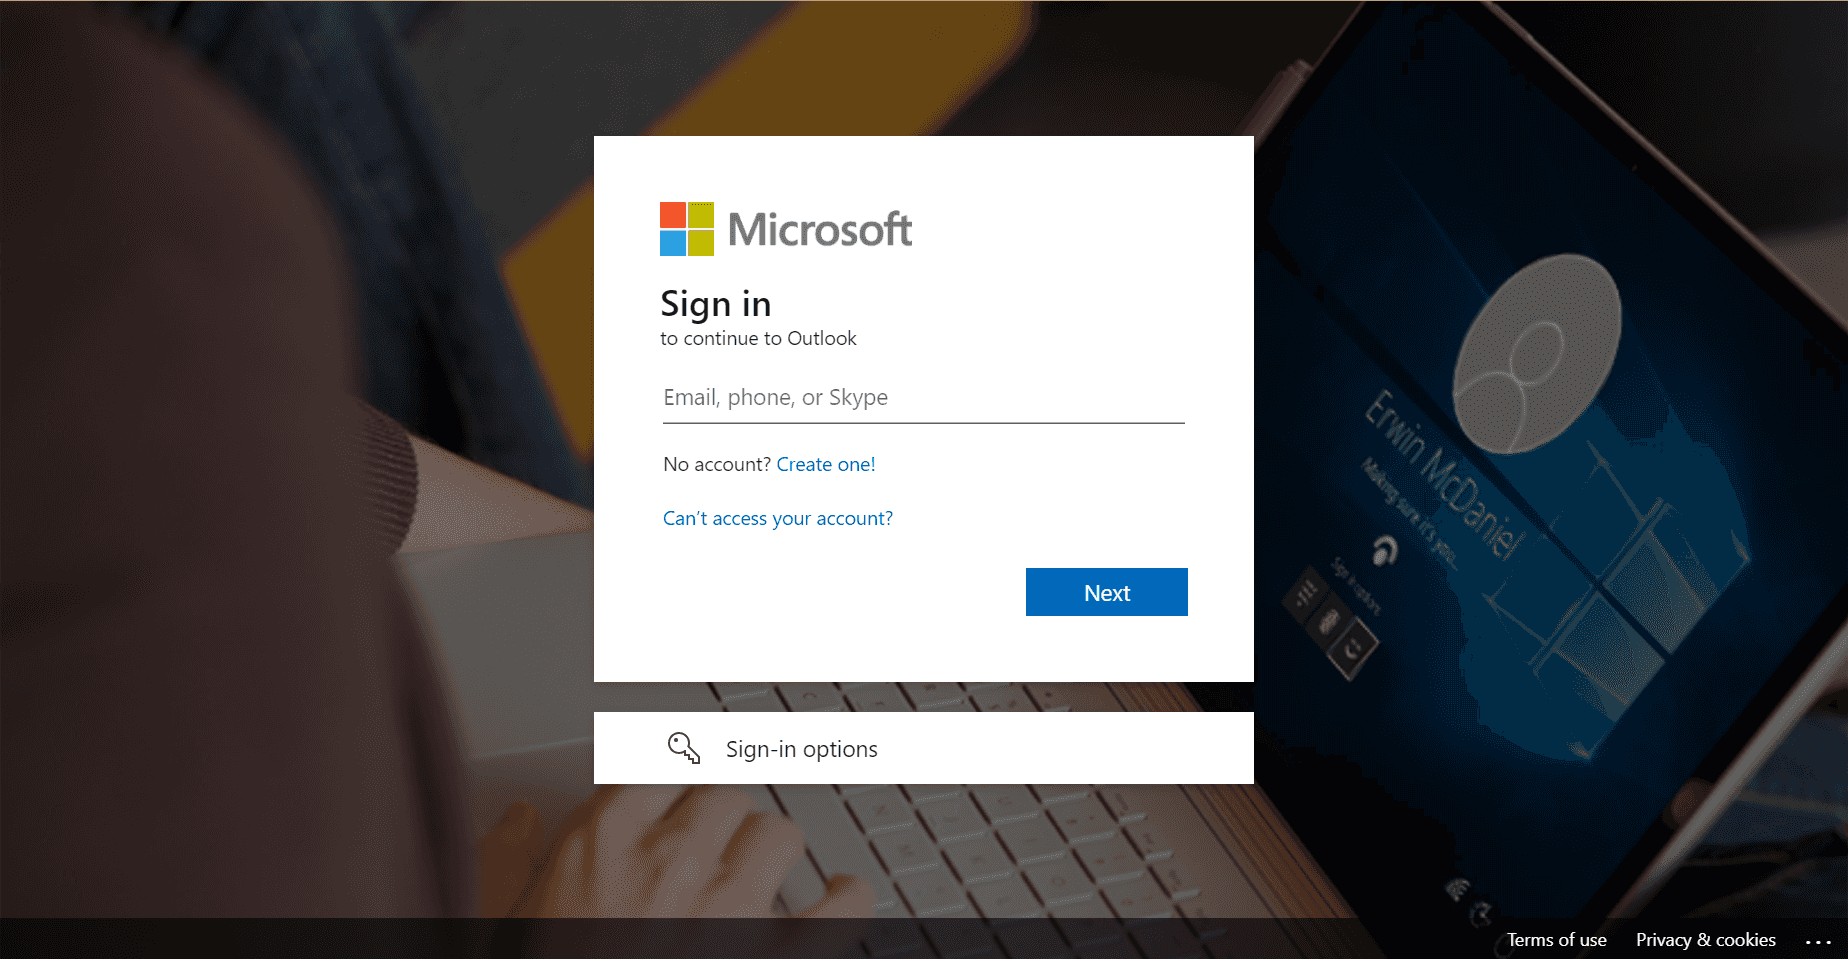 Microsoft.com branded sign-in page